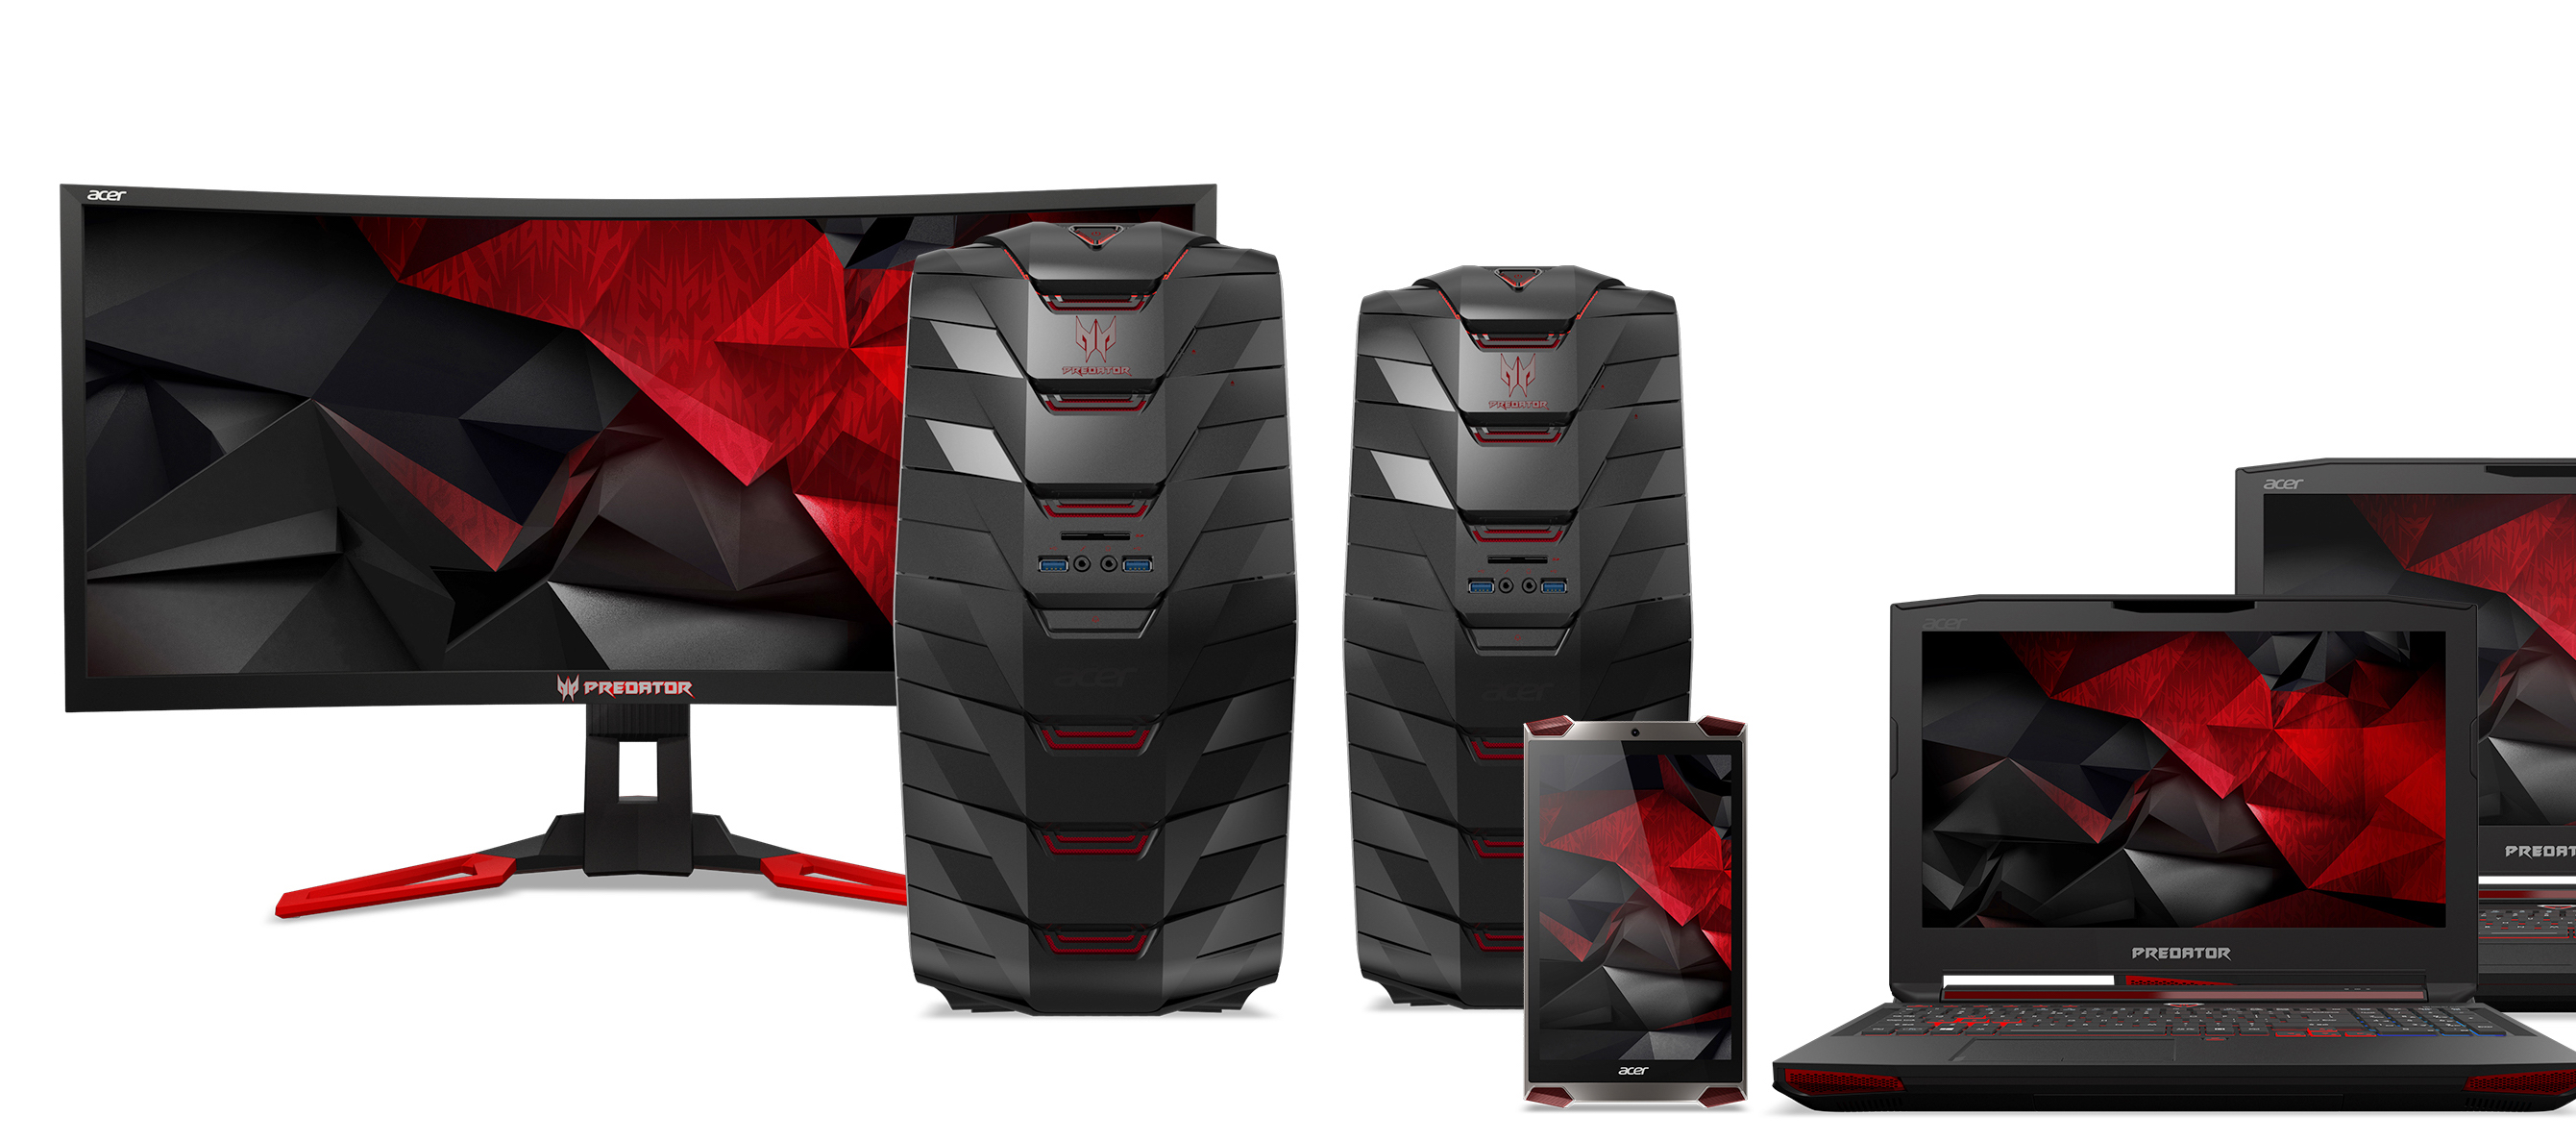 Predator series gaming laptop is said to be the world's first laptop to have a curved screen